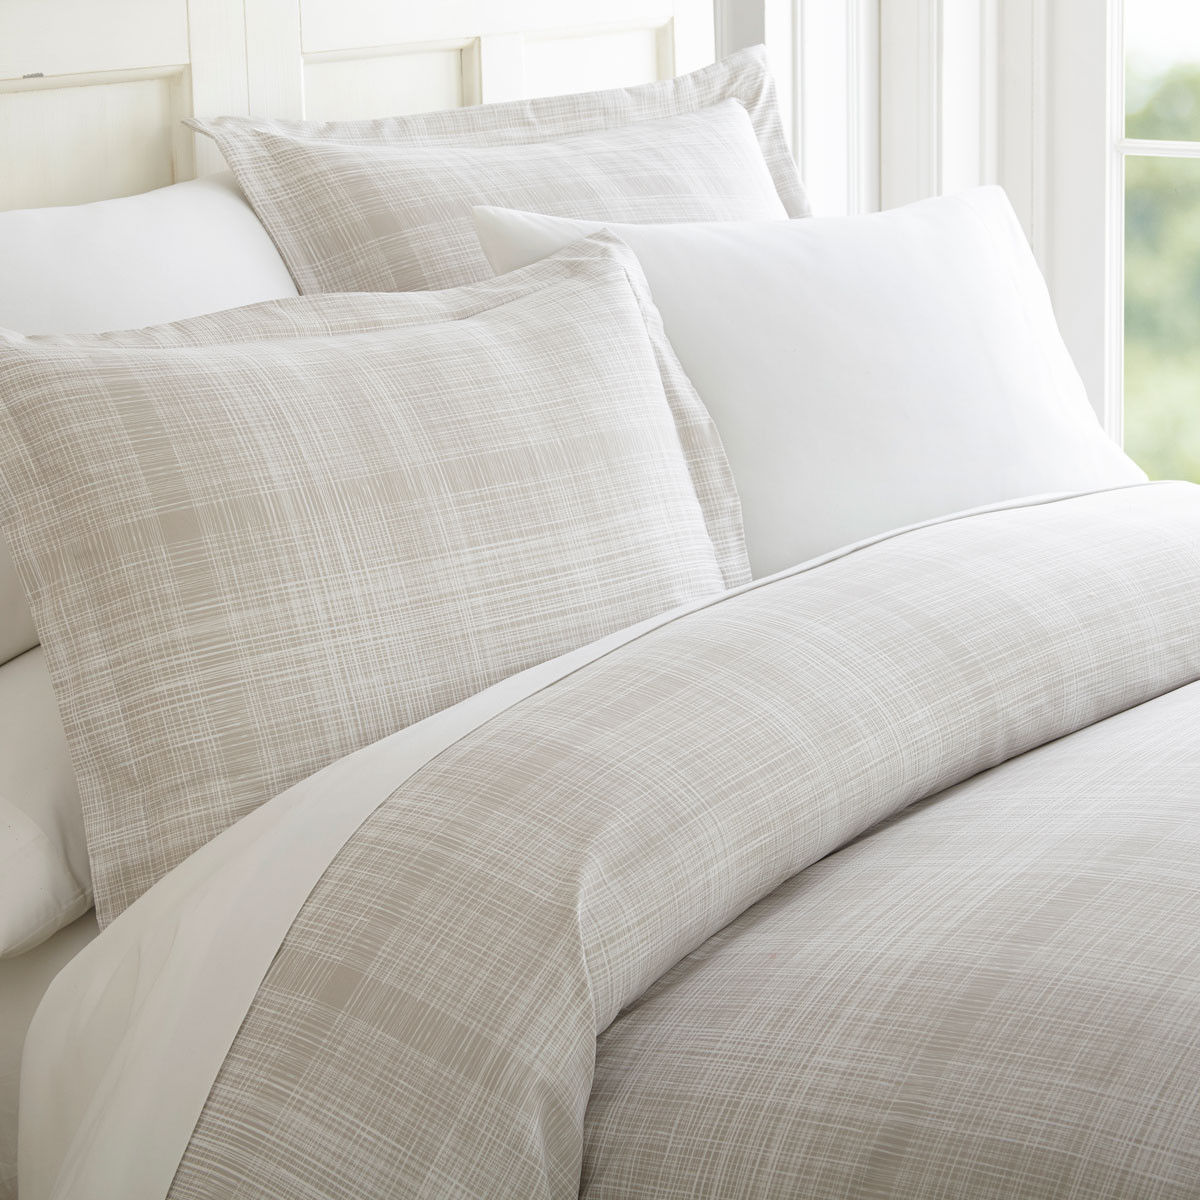 What's the size of duvet cover and pillow shams in each thatch home bedding set?